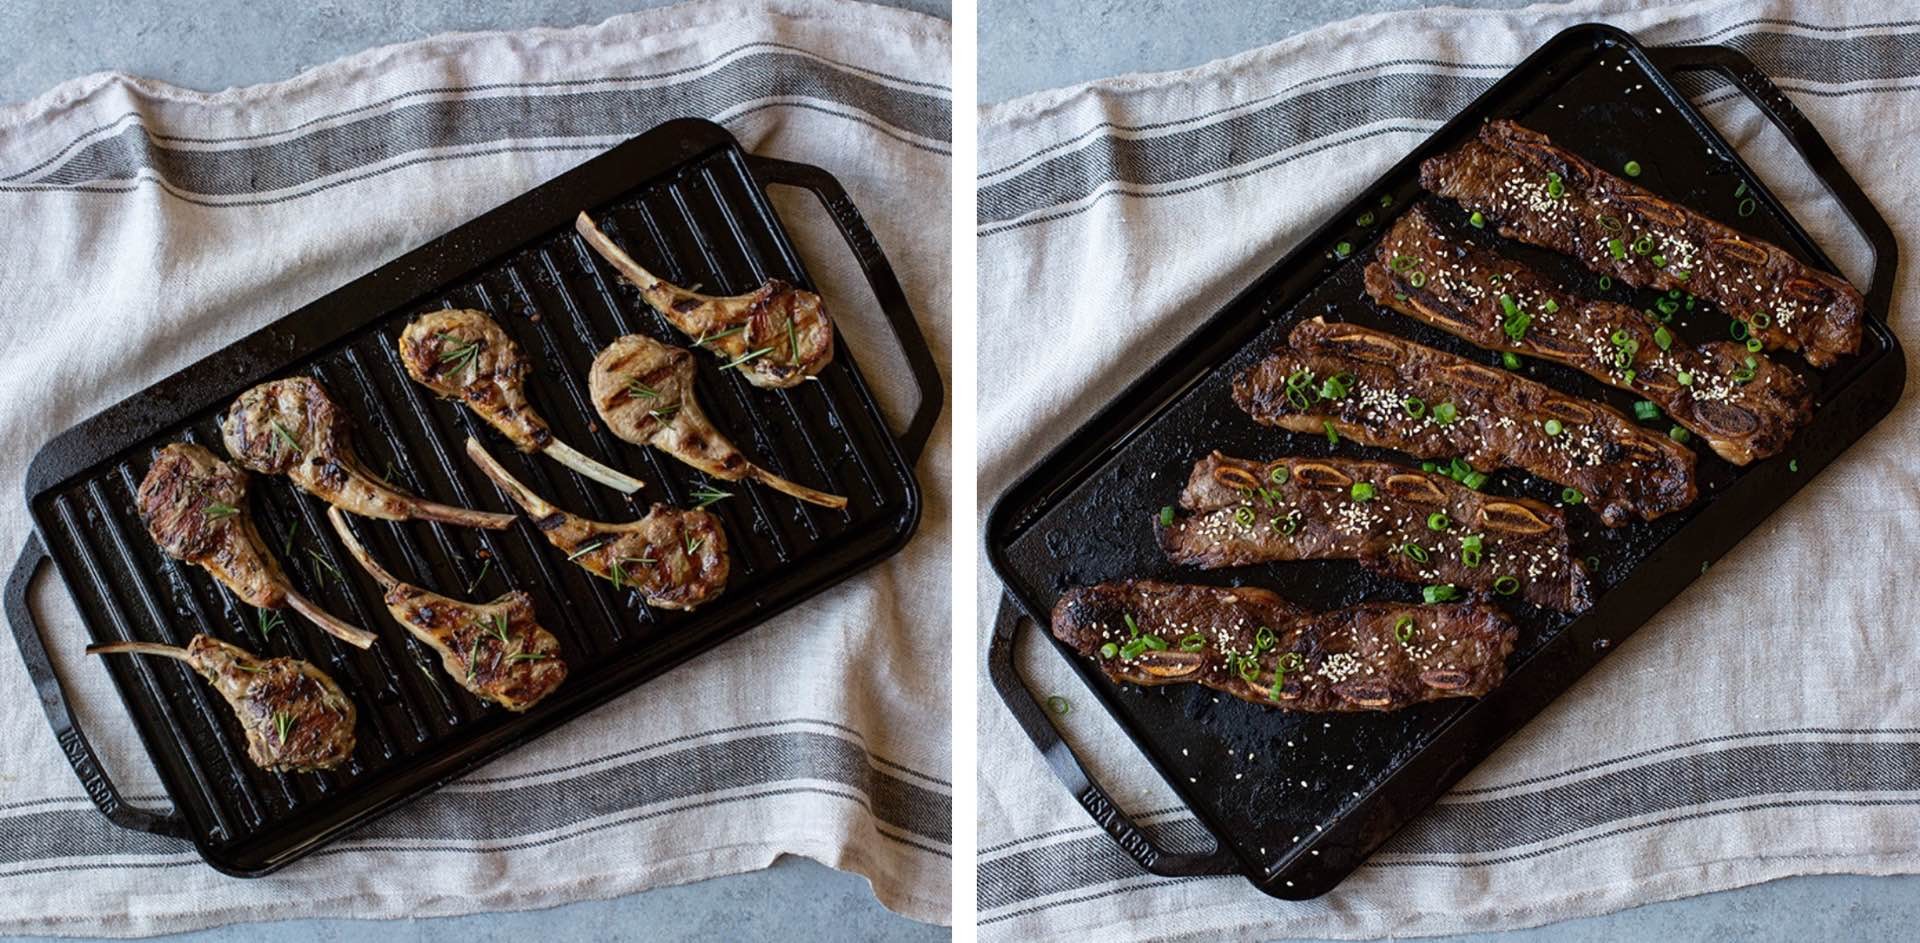 Lodge's reversible cast iron grill + griddle. ($73)